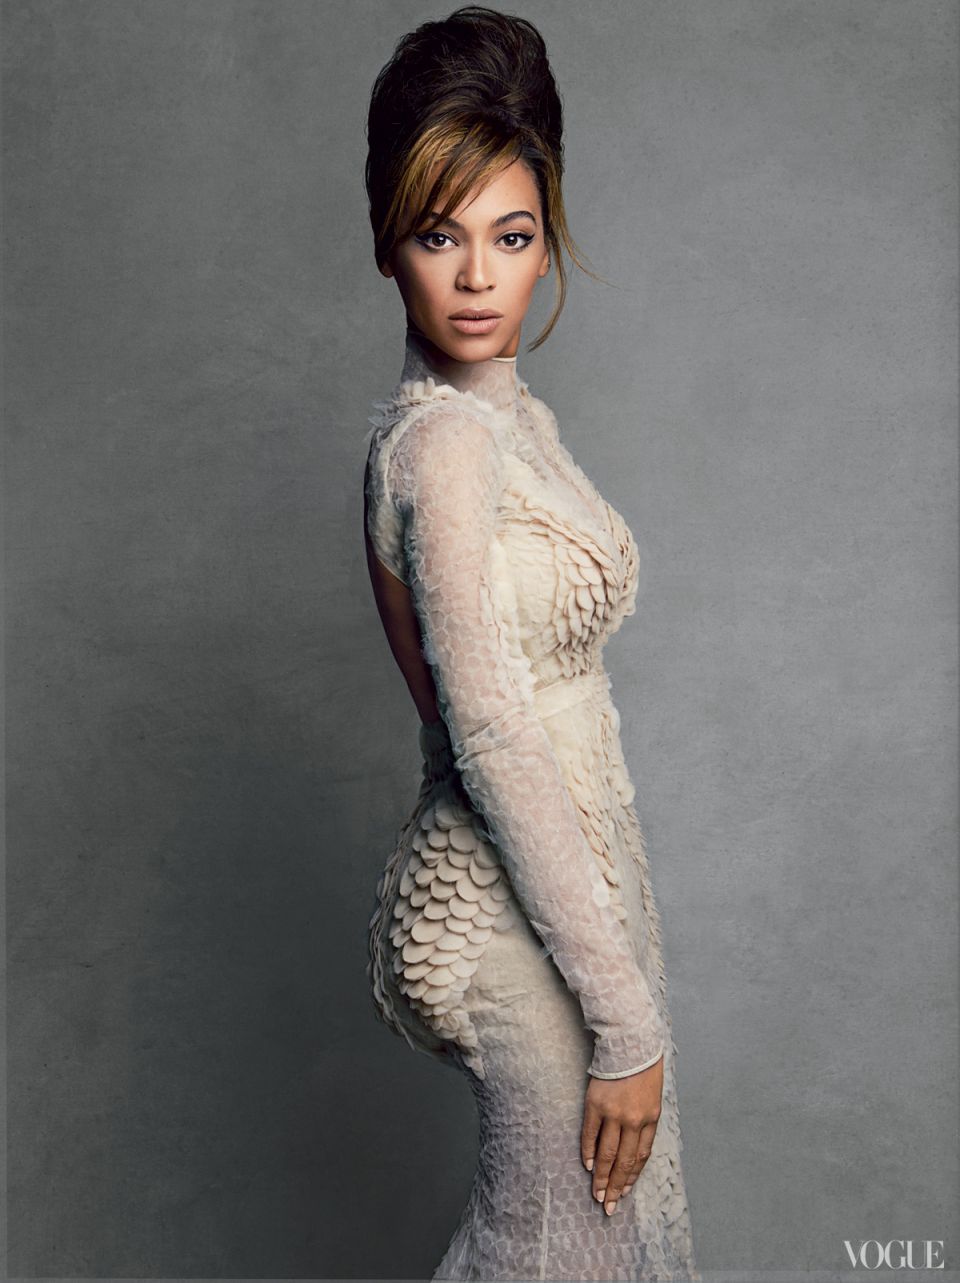 Beyonce by Patrick Demarchelier for Vogue March 2013_7.jpg